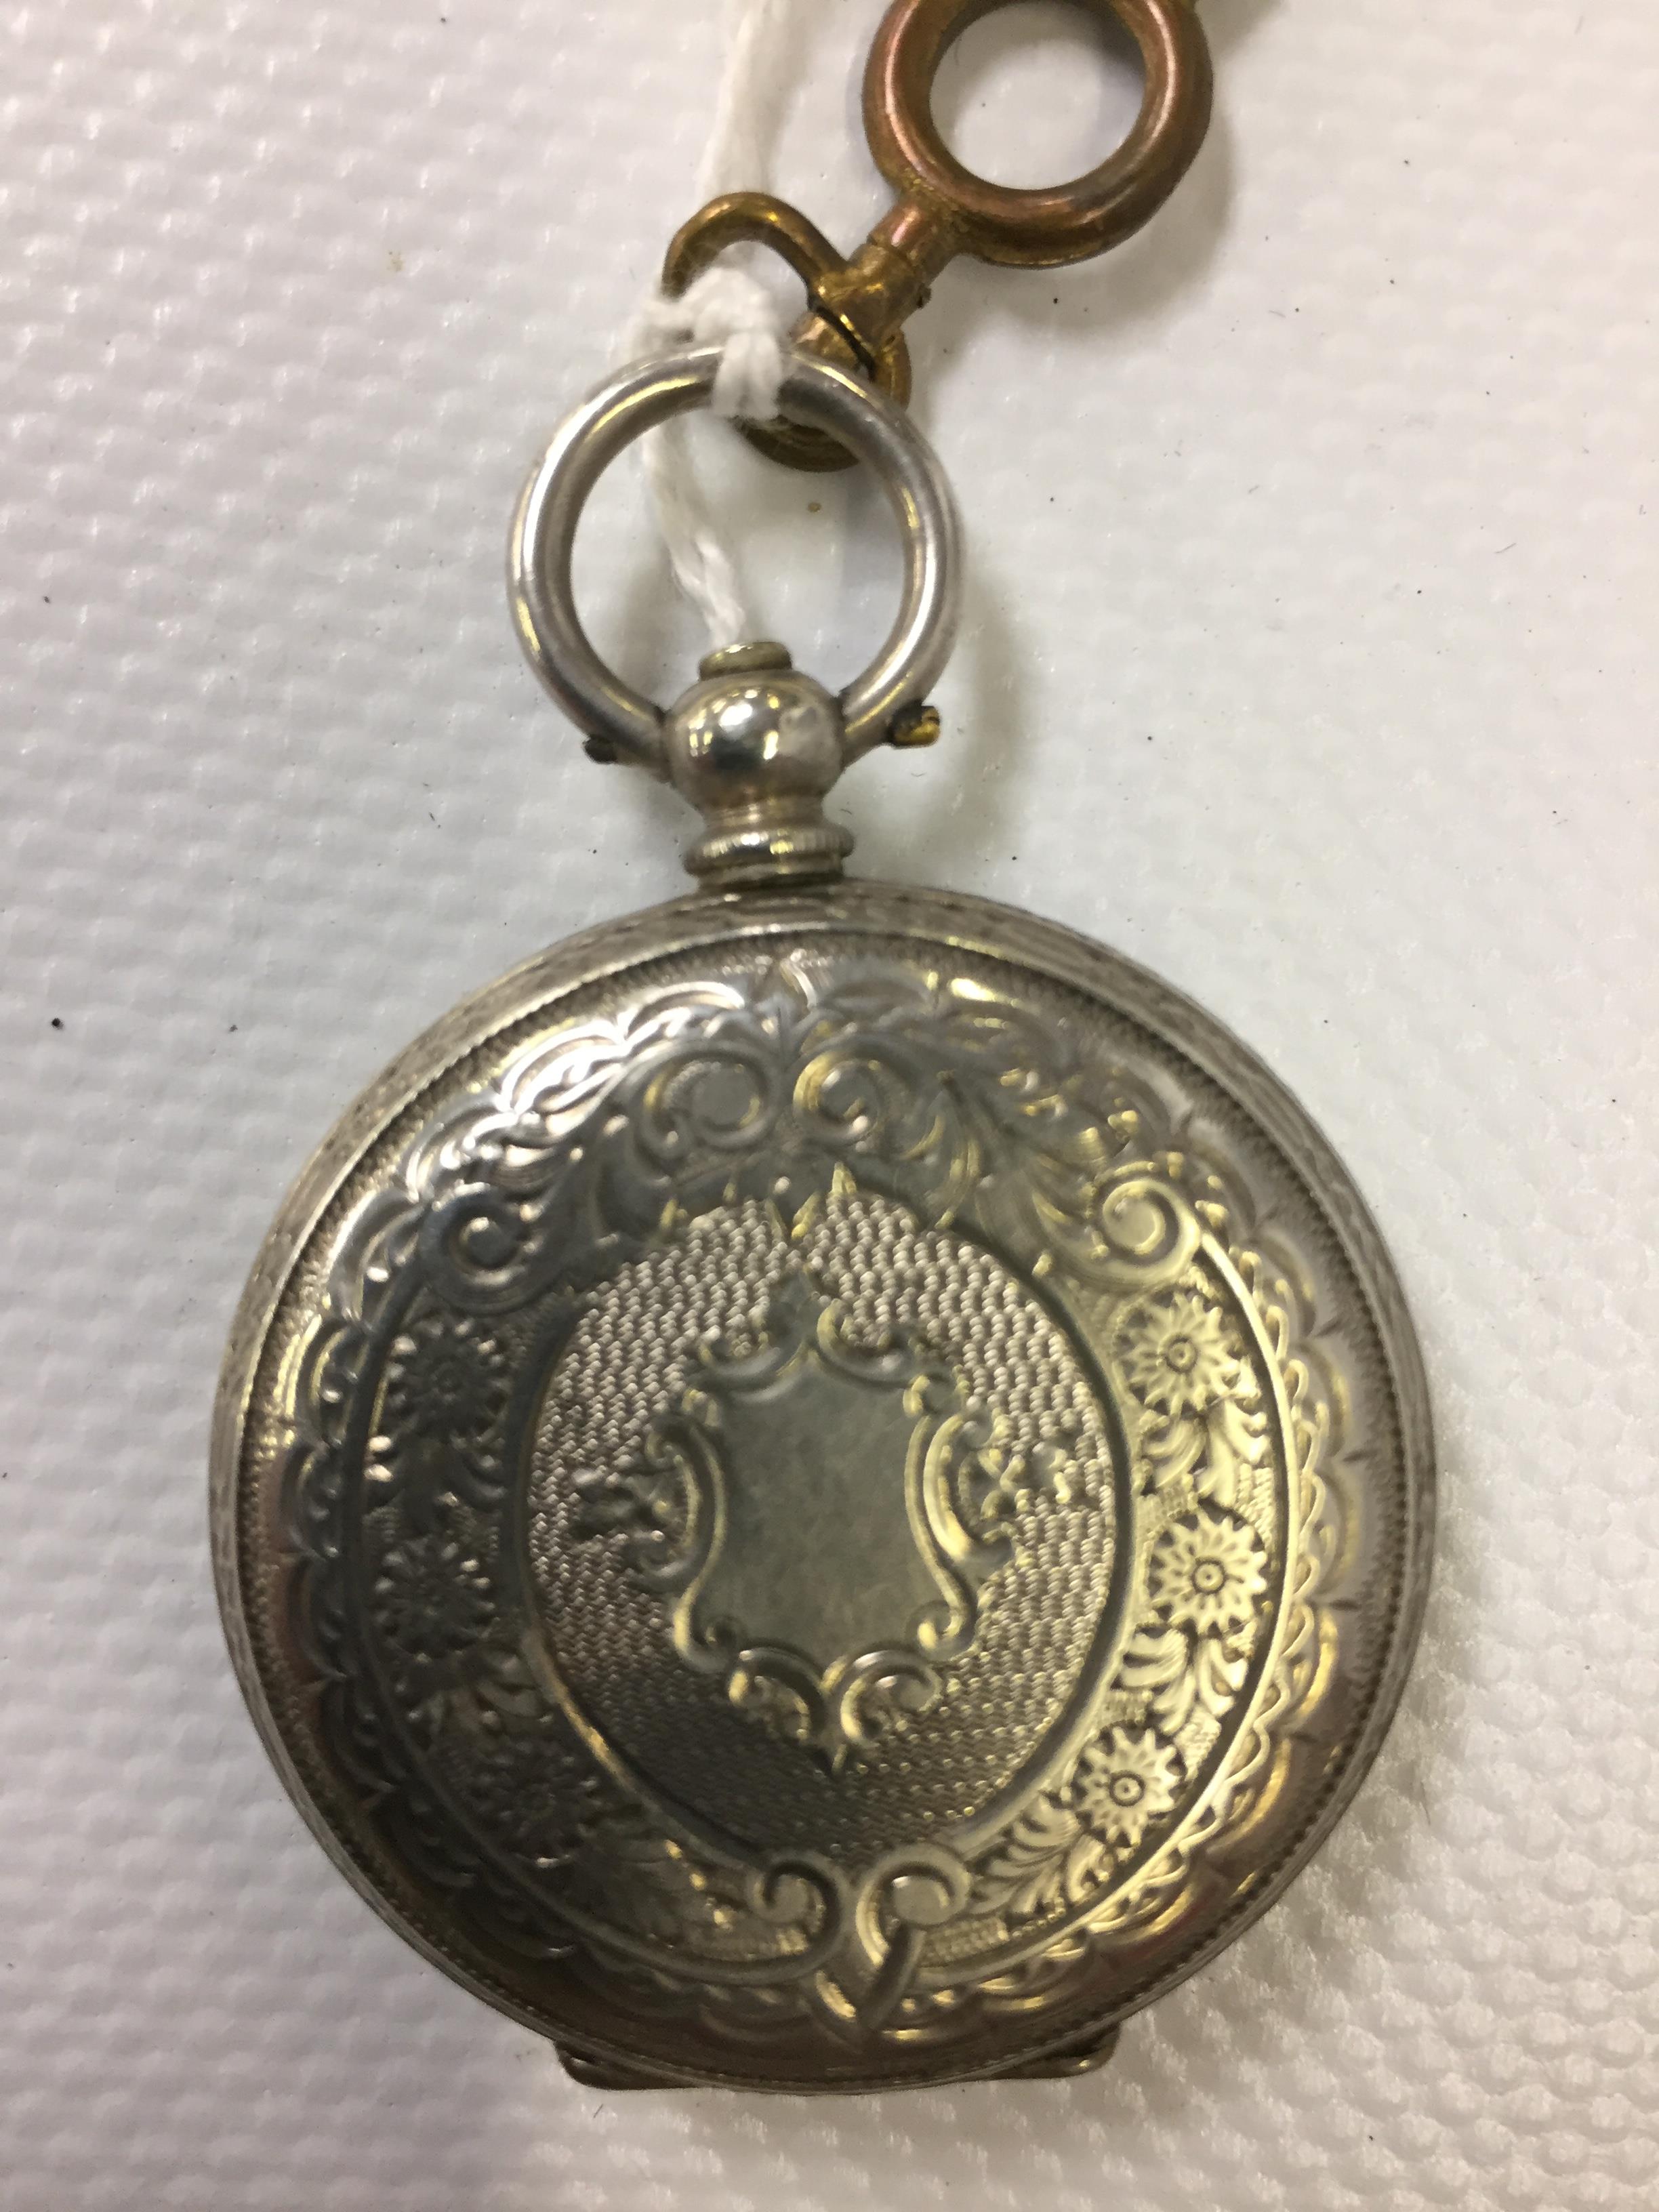 SILVER CASED POCKET/FOB WATCH HALLMARKED LONDON 1882 ORNATE ENGRAVED CASE WITH SILVERED DIAL, - Image 3 of 3